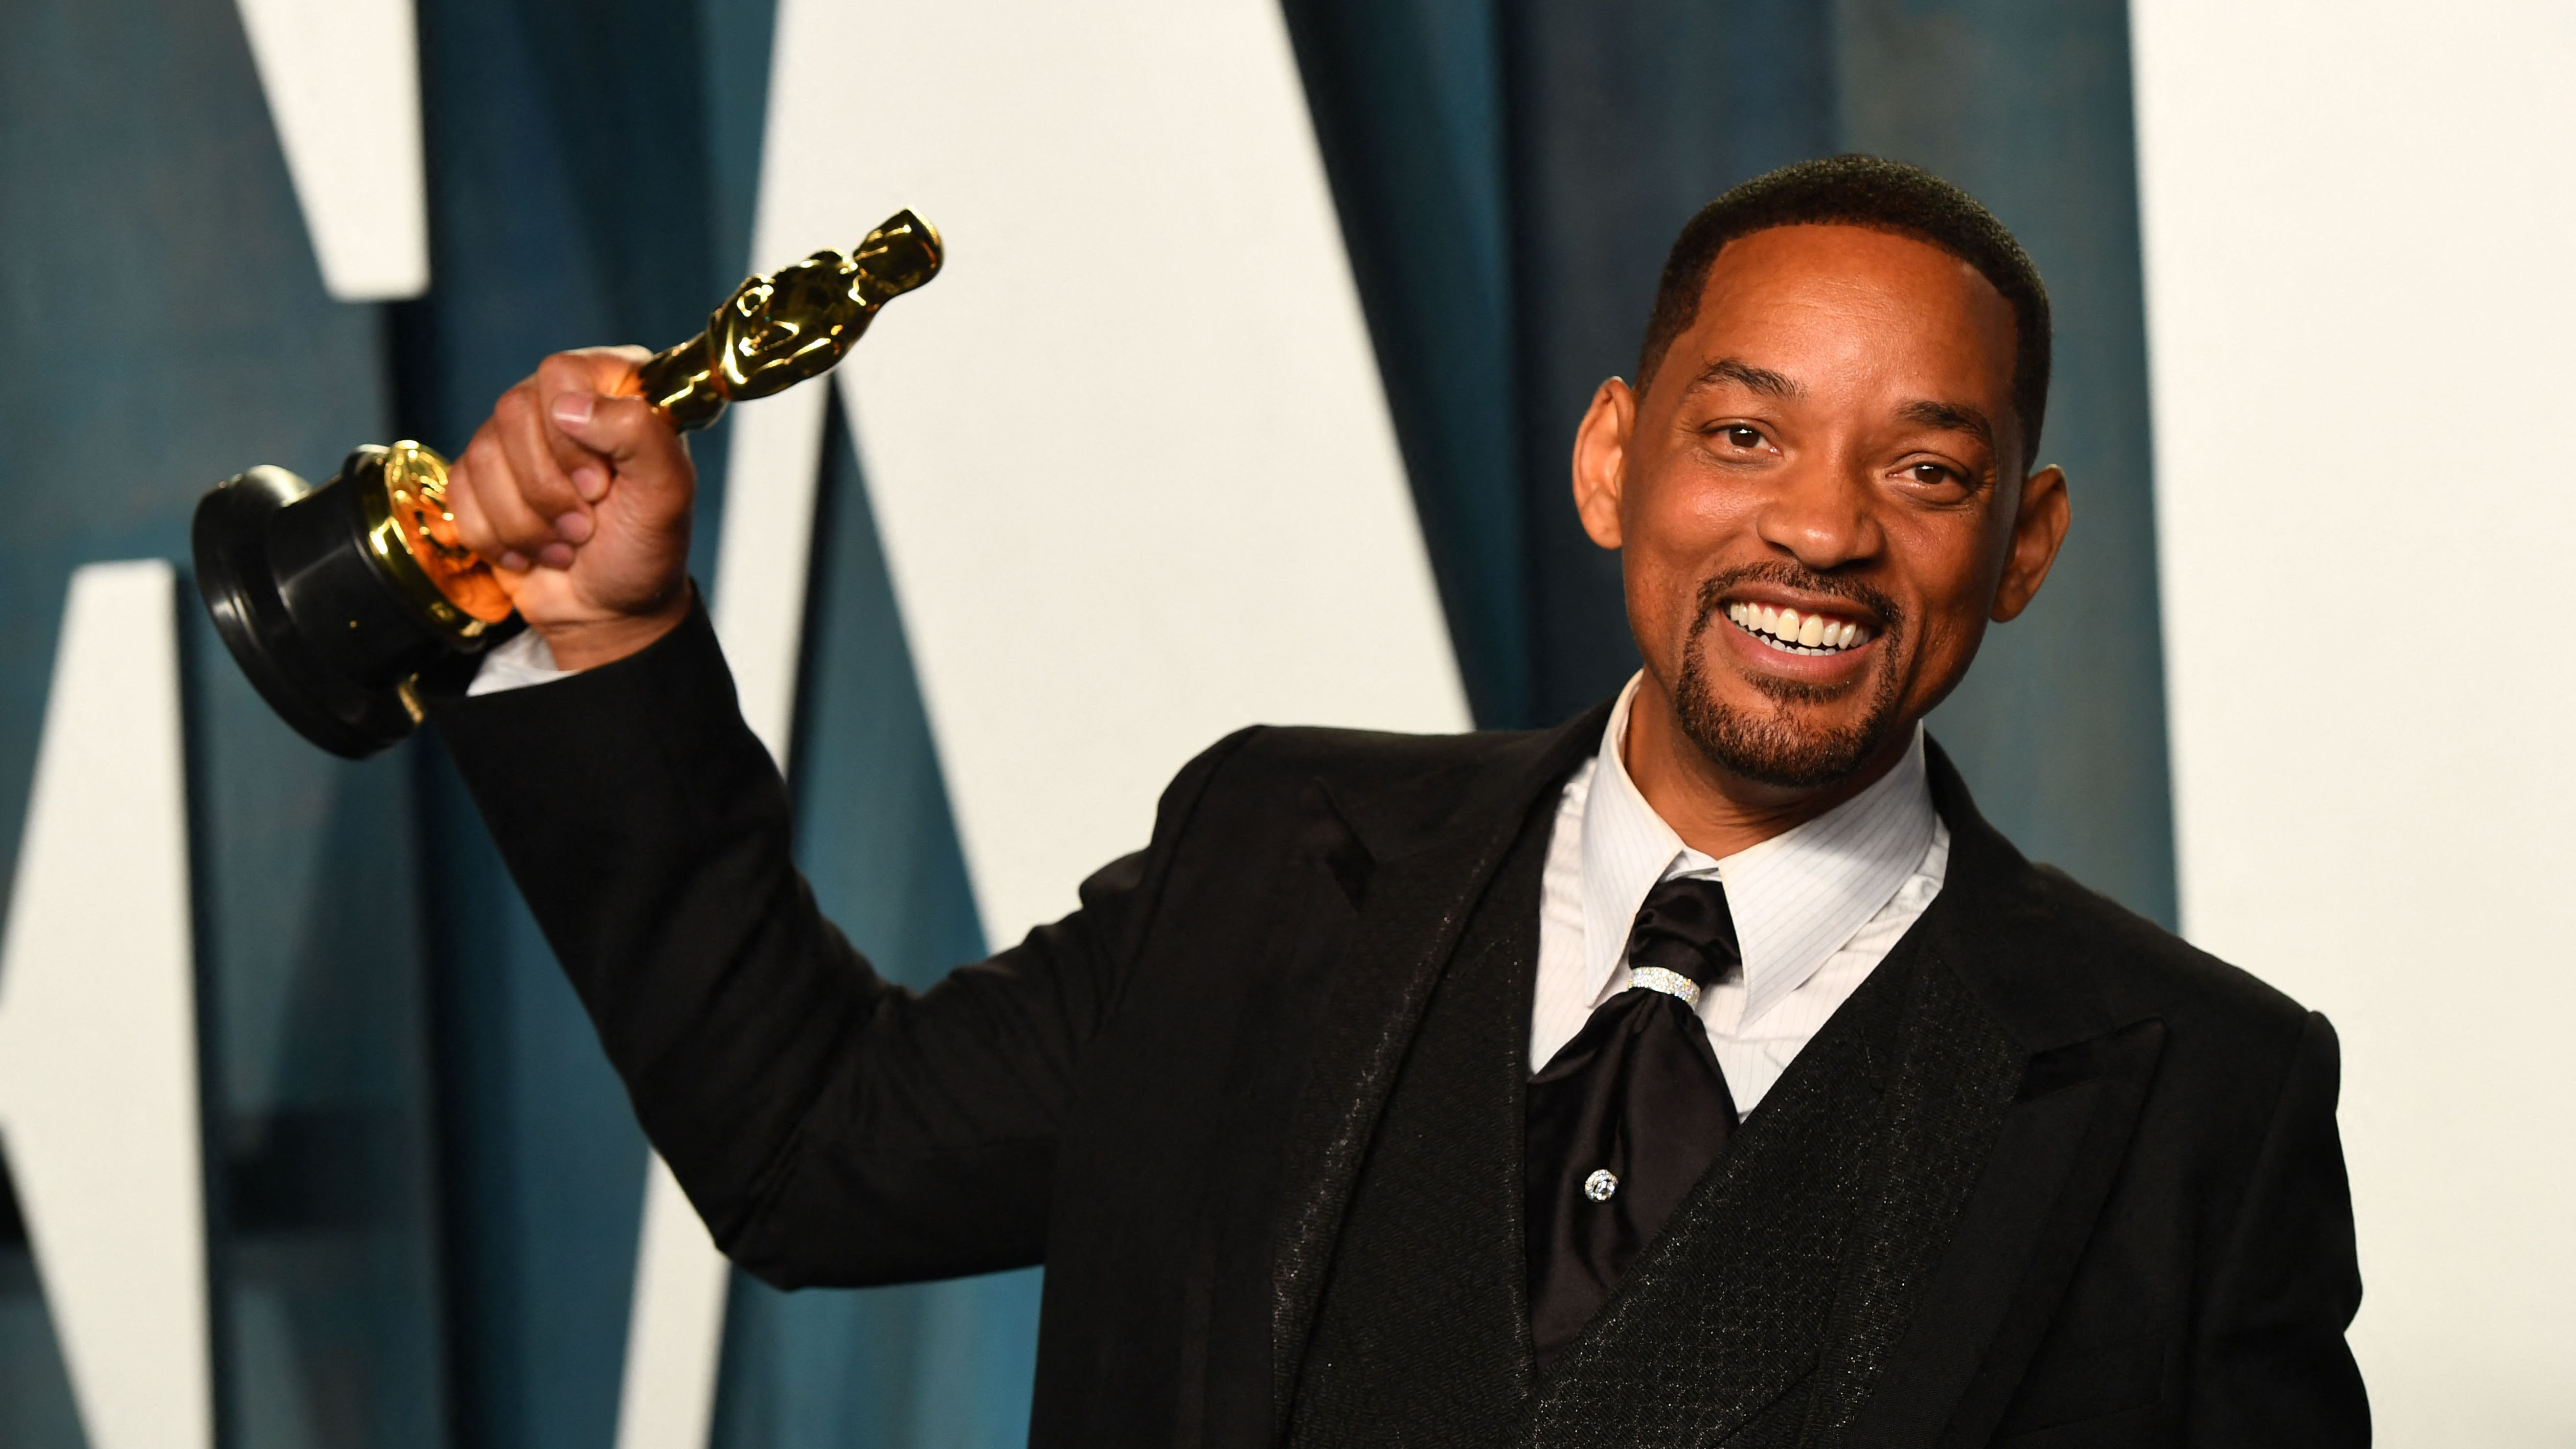 Will Smith Banned From Academy Events for 10 Years After Chris Rock Slap